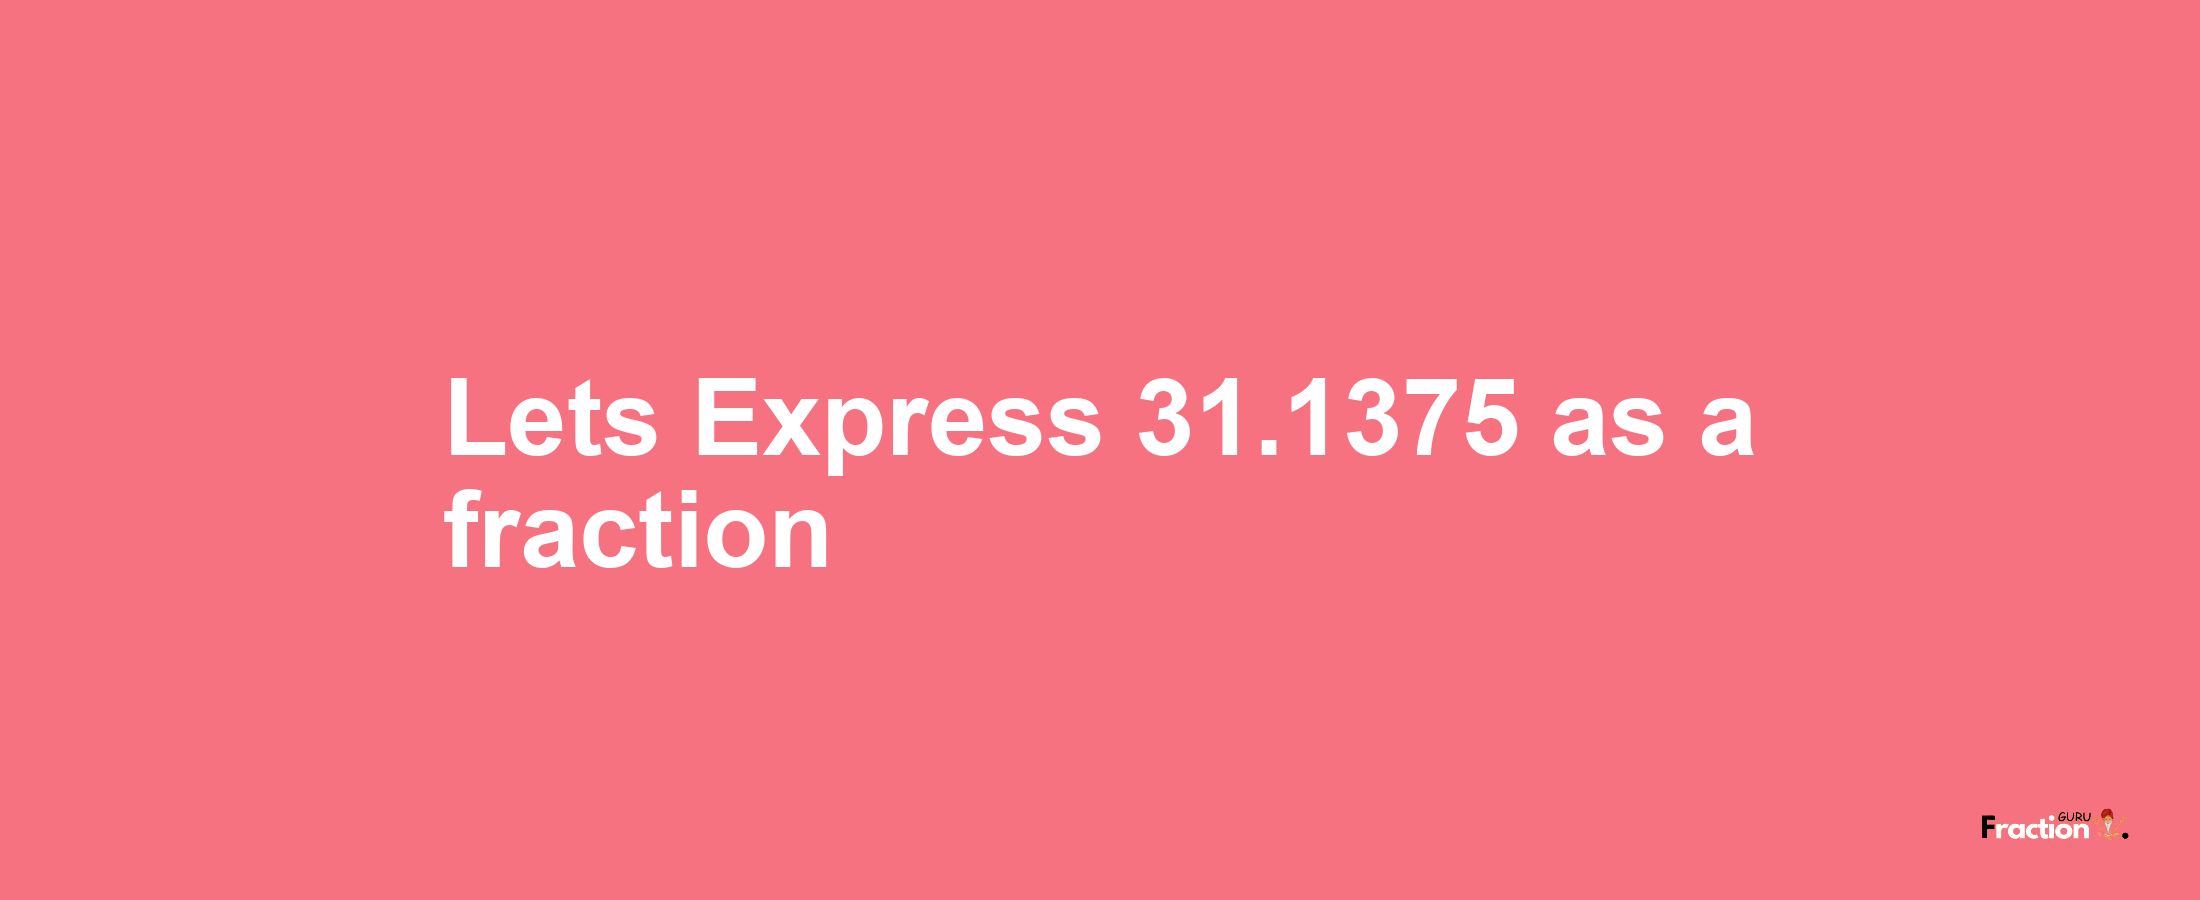 Lets Express 31.1375 as afraction